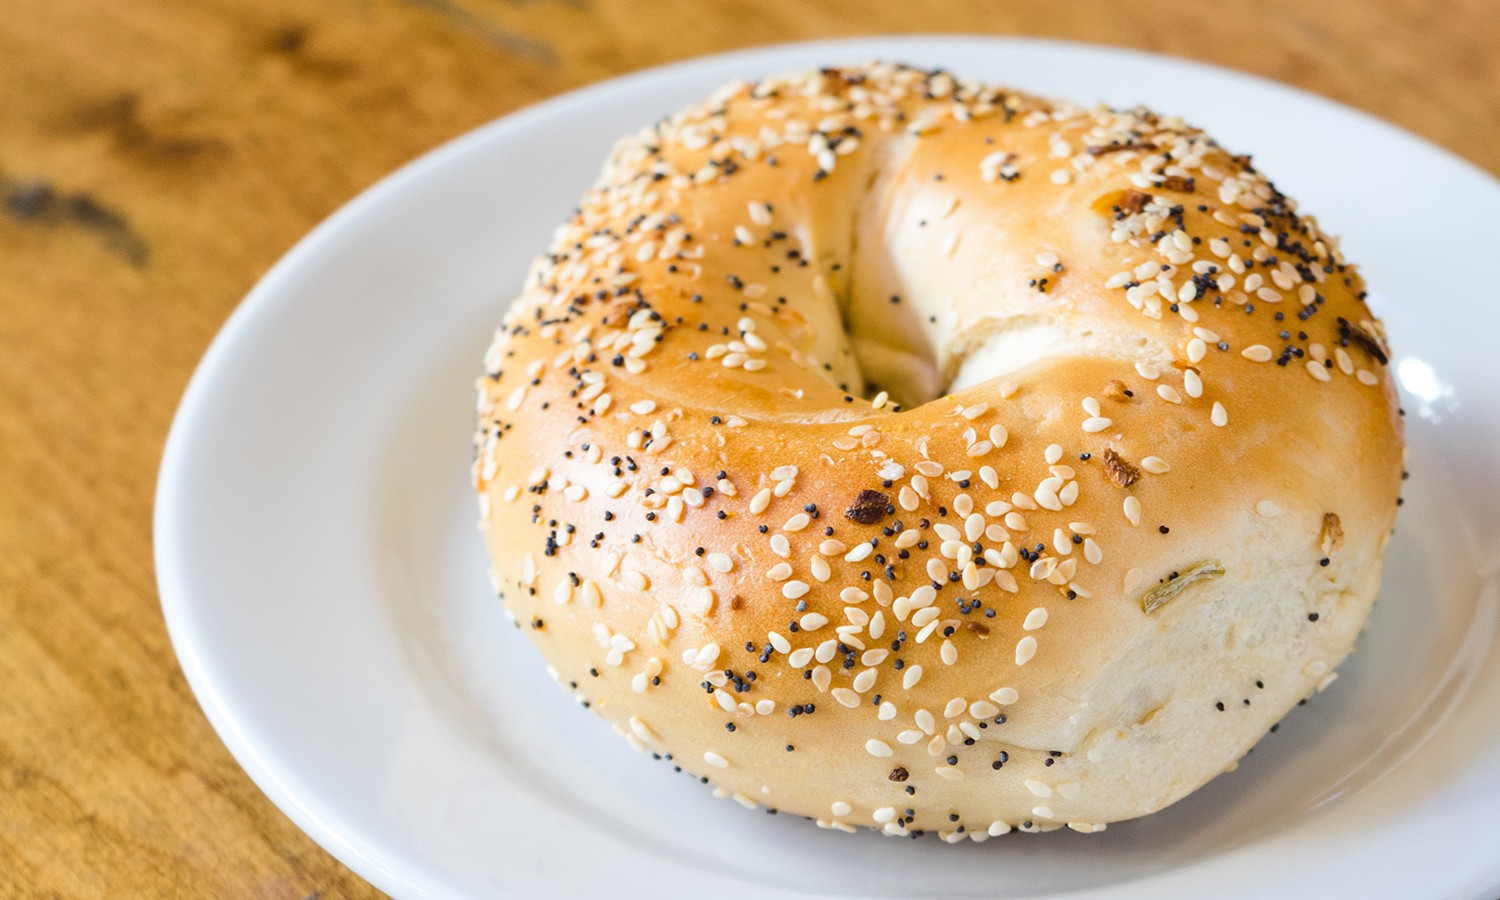 High Volume Bagel Store in Prime Location